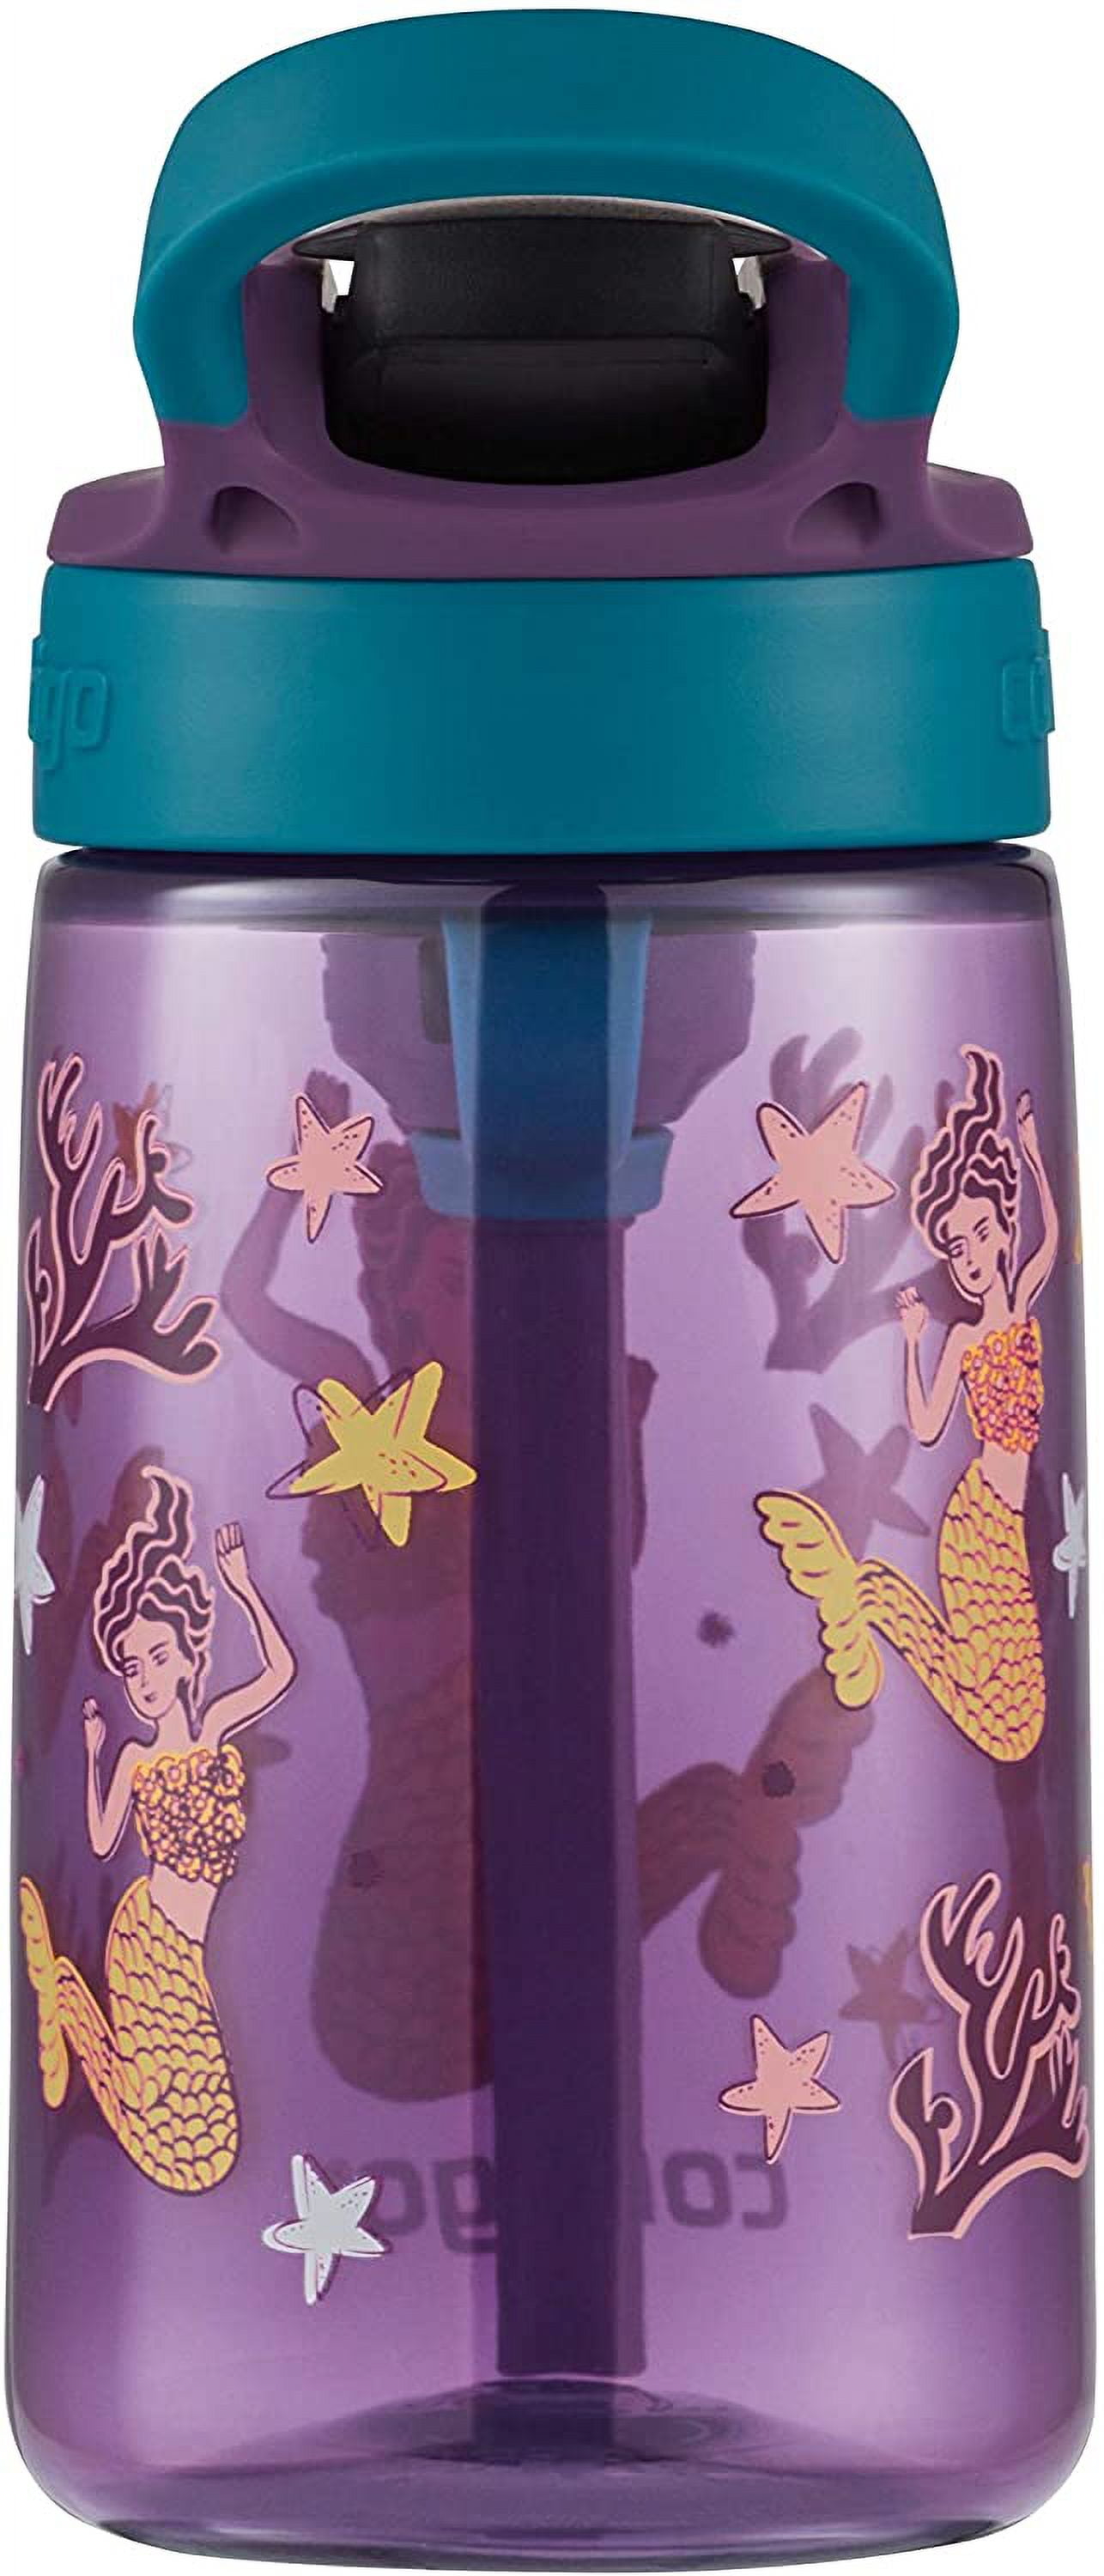  Contigo Aubrey Kids Cleanable Water Bottle with Silicone Straw  and Spill-Proof Lid, Dishwasher Safe, 14oz 2-Pack, Blue & Clouds : Sports &  Outdoors